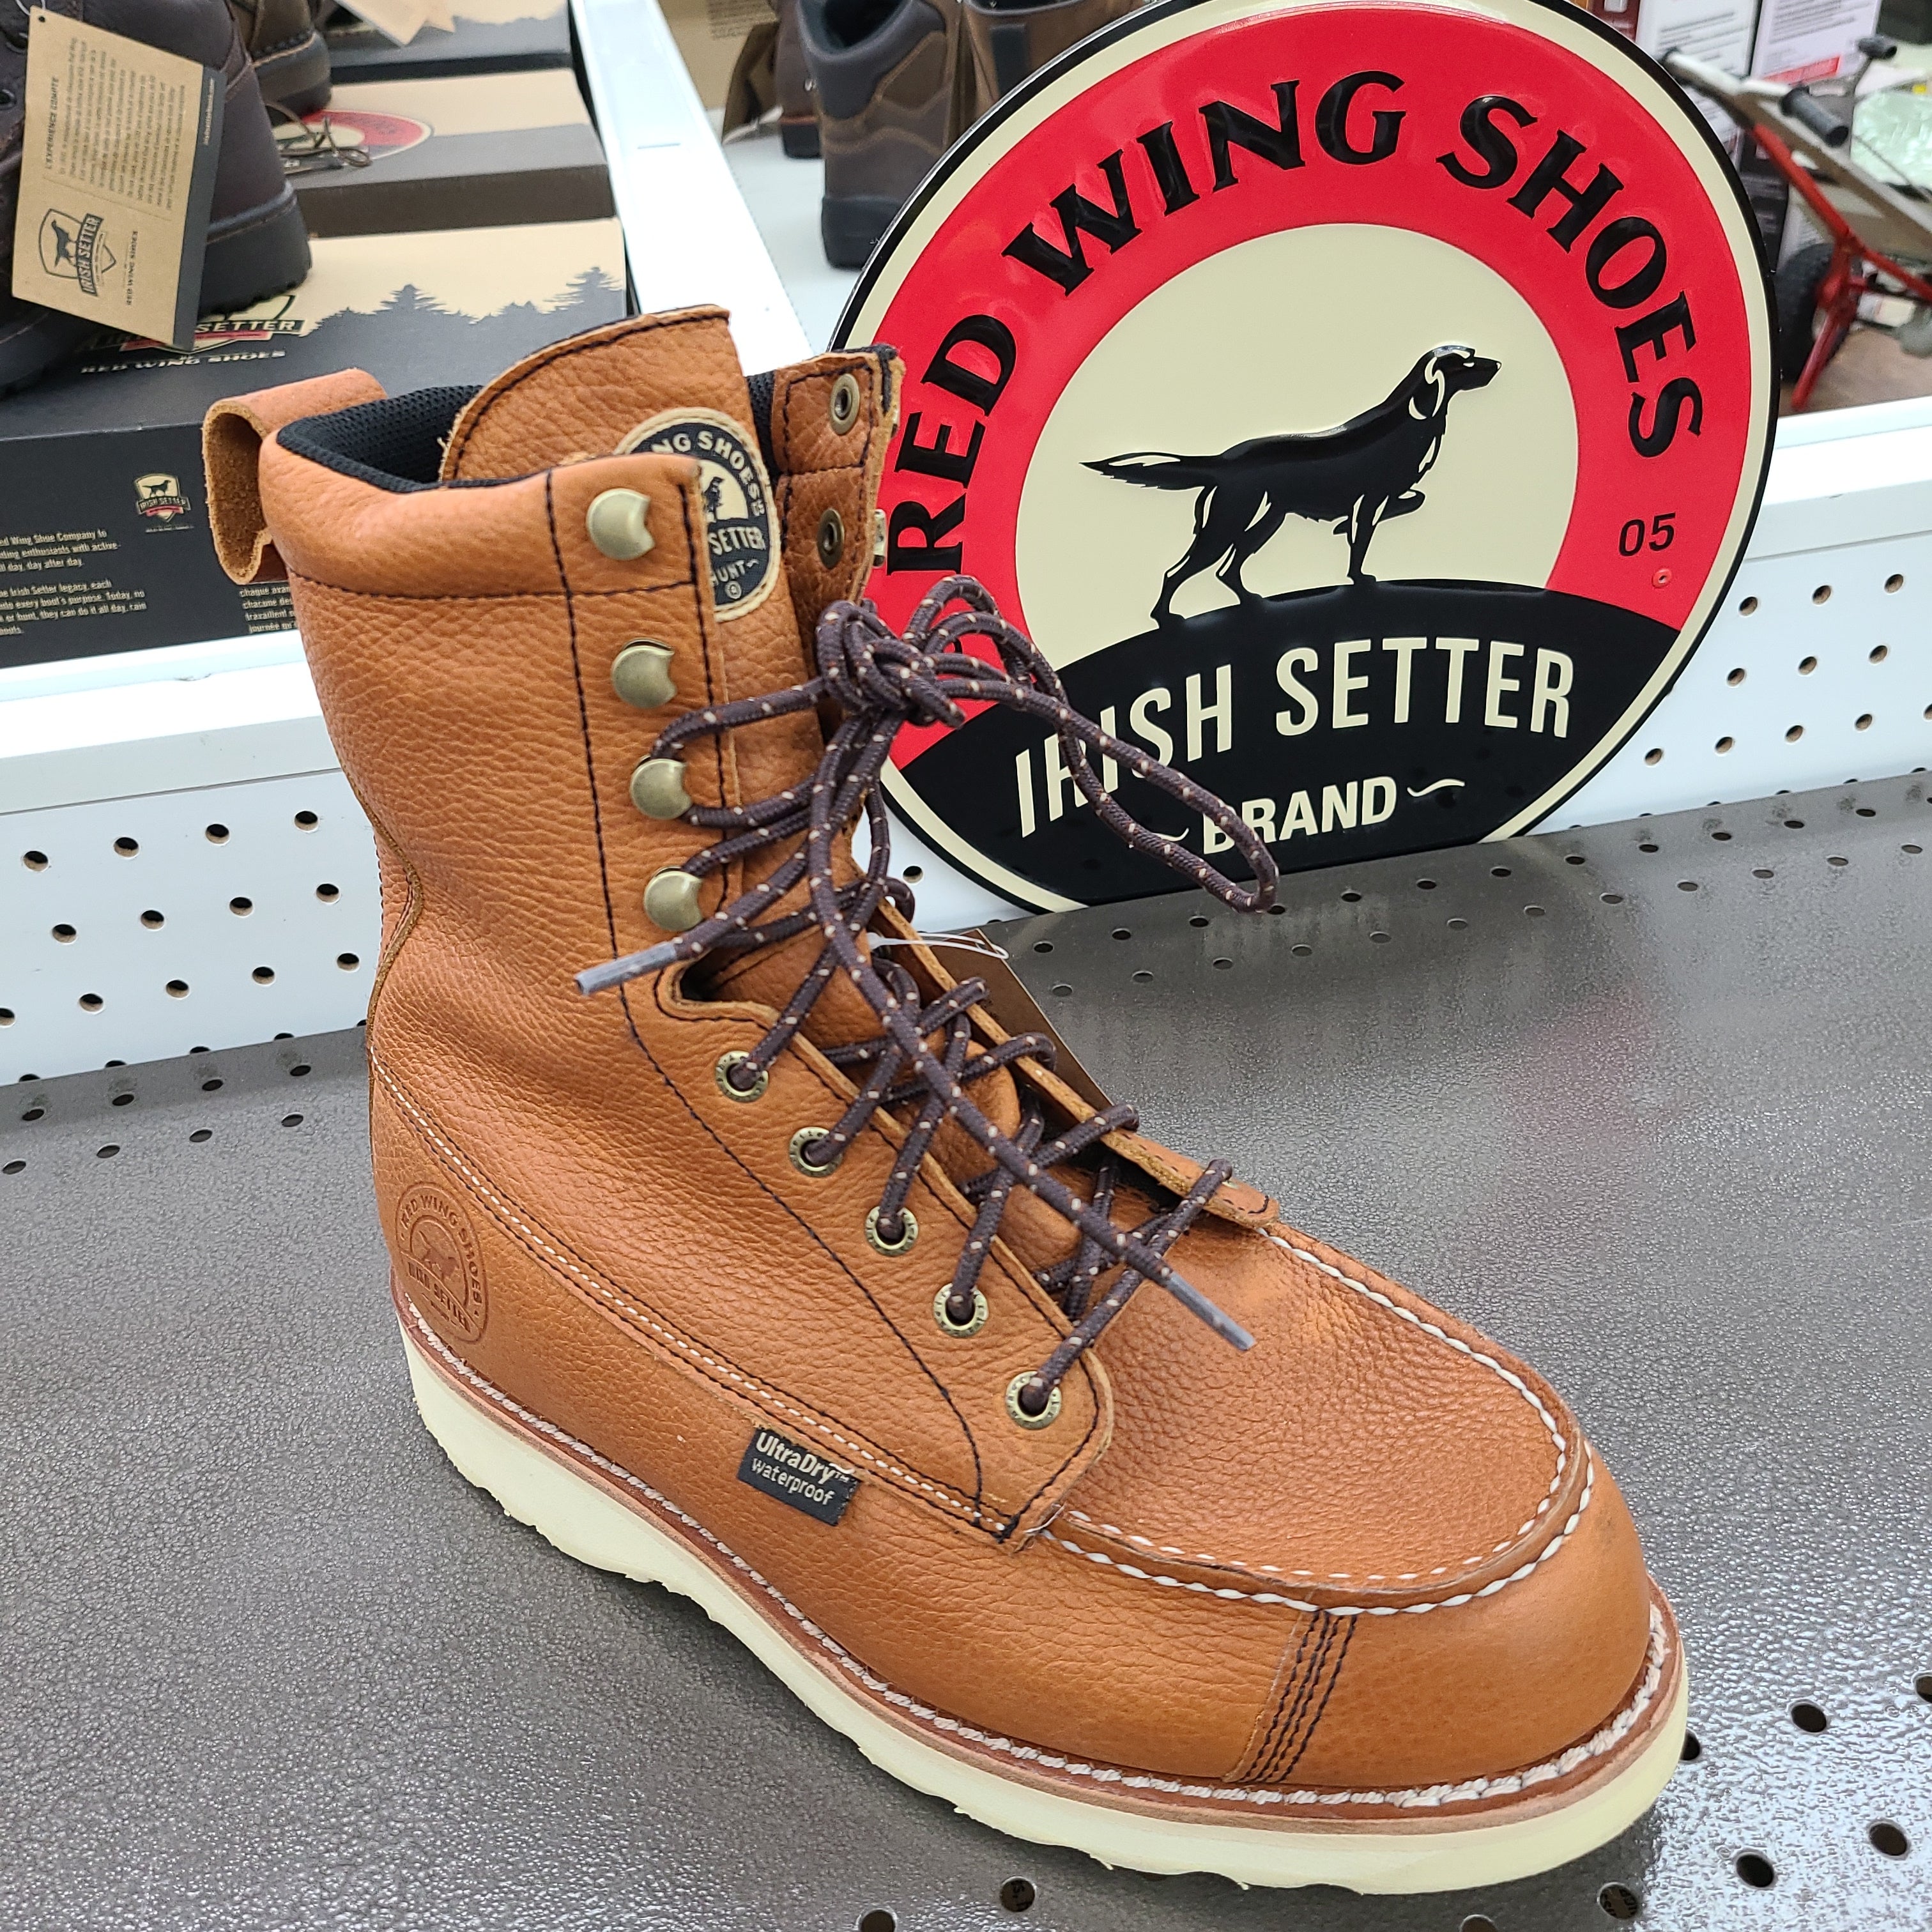 Red Wing Shoes Irish Setter Brand Wingshooter 9